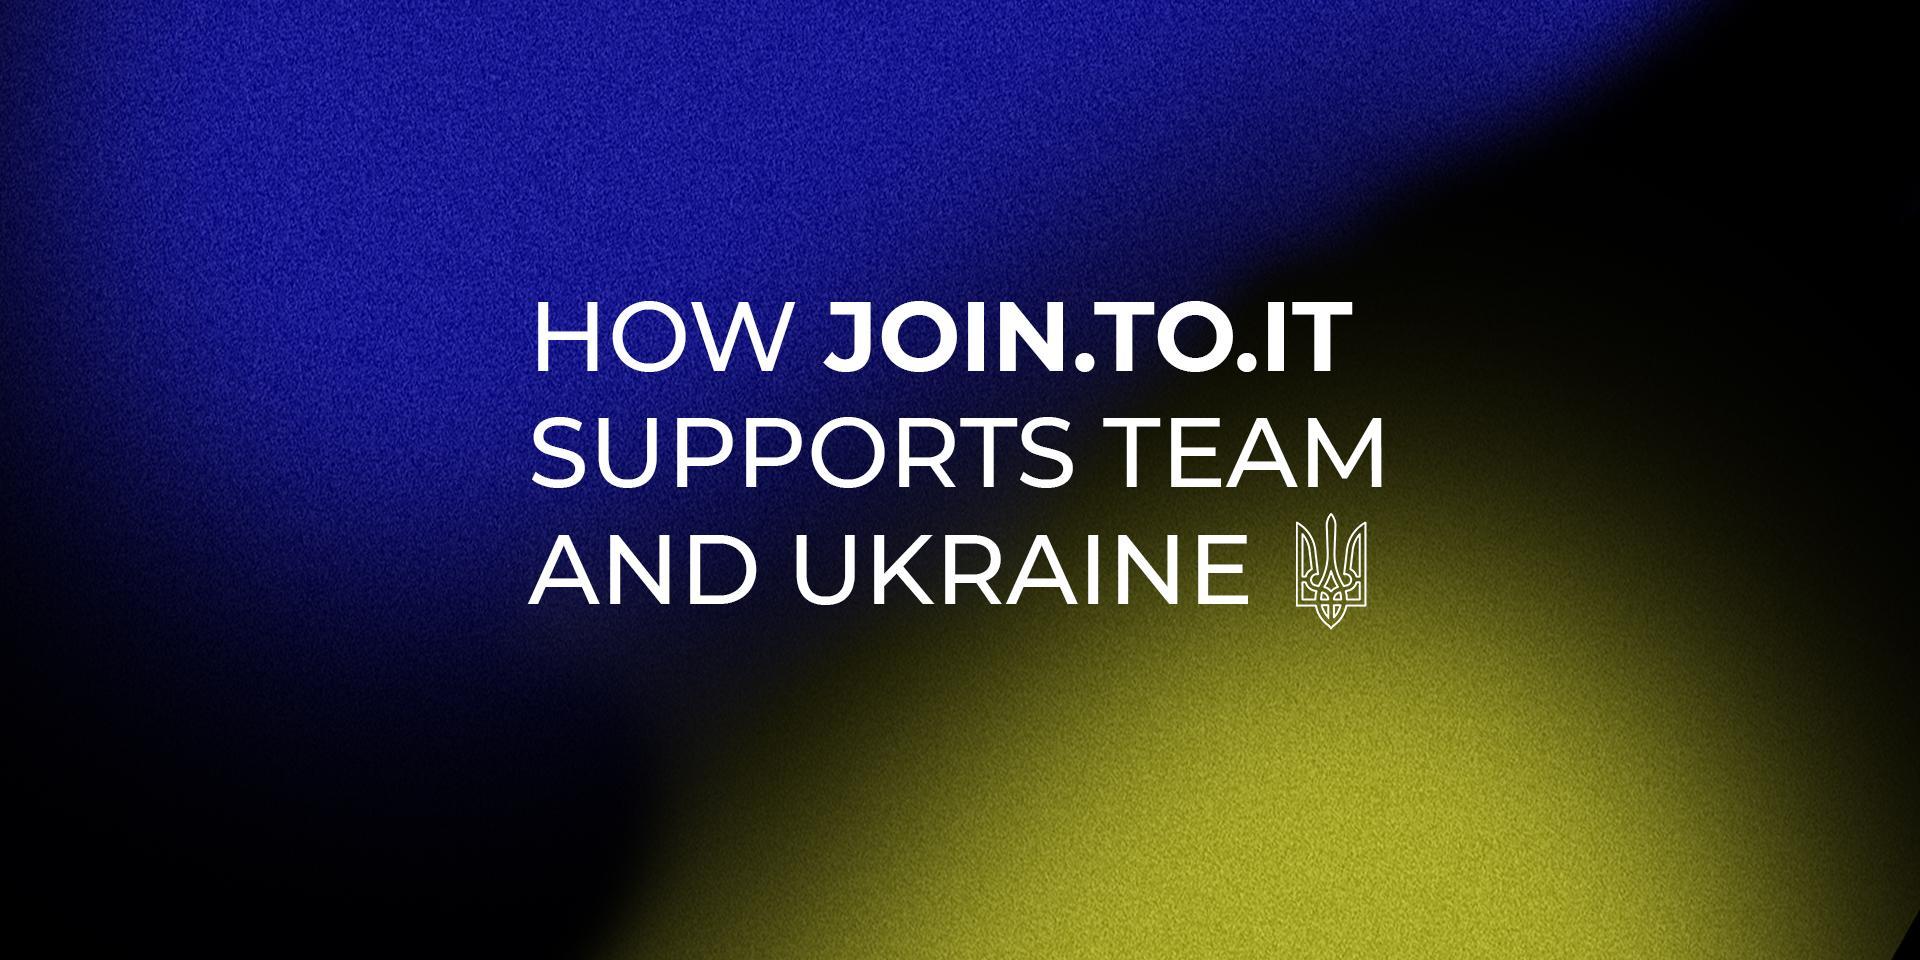 How Join.To.IT supports team and country during wartime